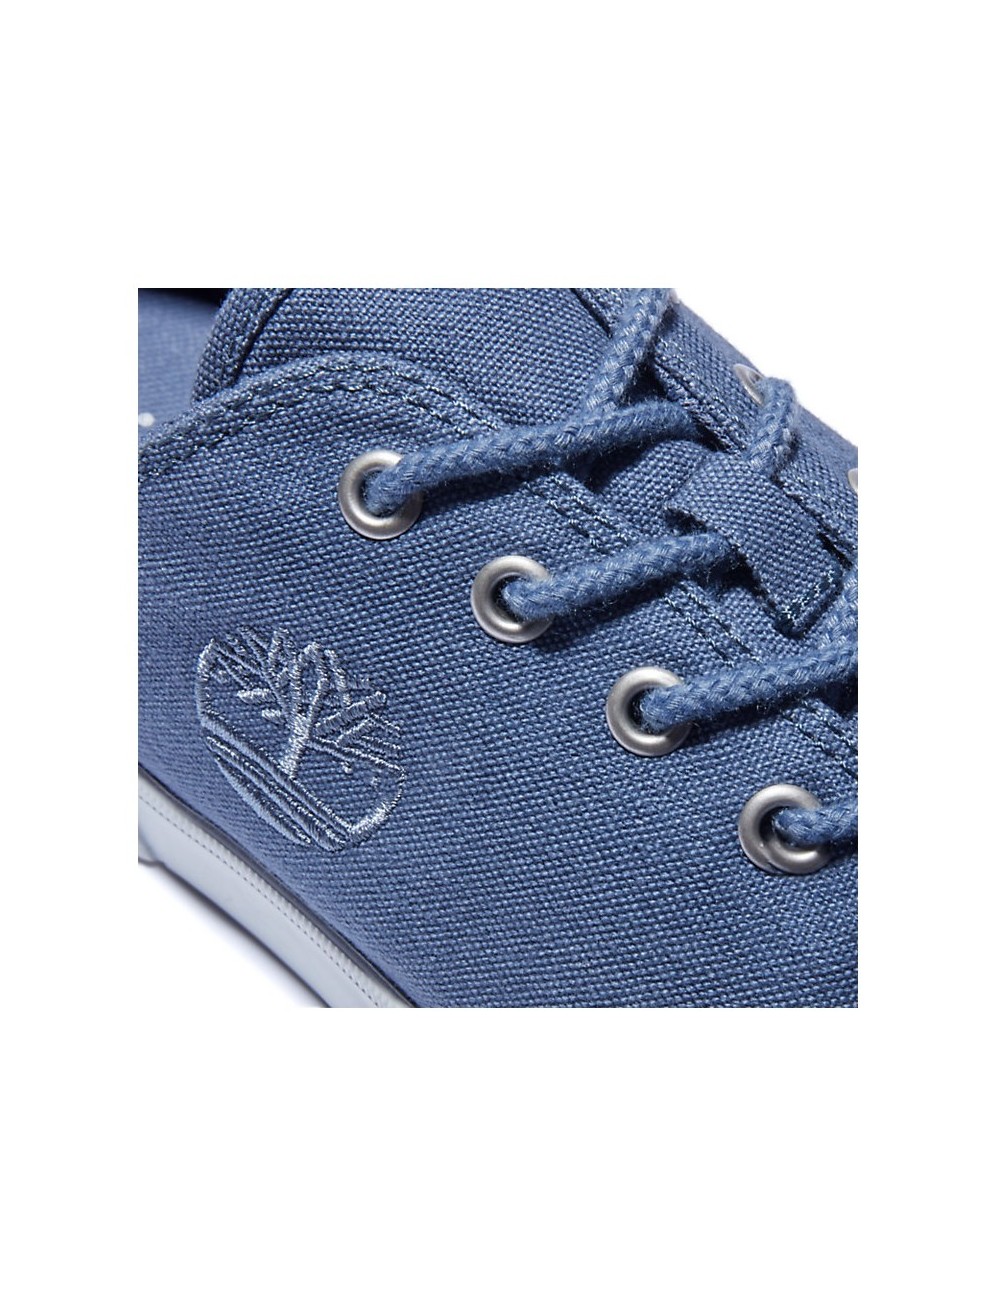 MEN'S SNEAKERS TIMBERLAND UNION WHARF 2.0 BLUE